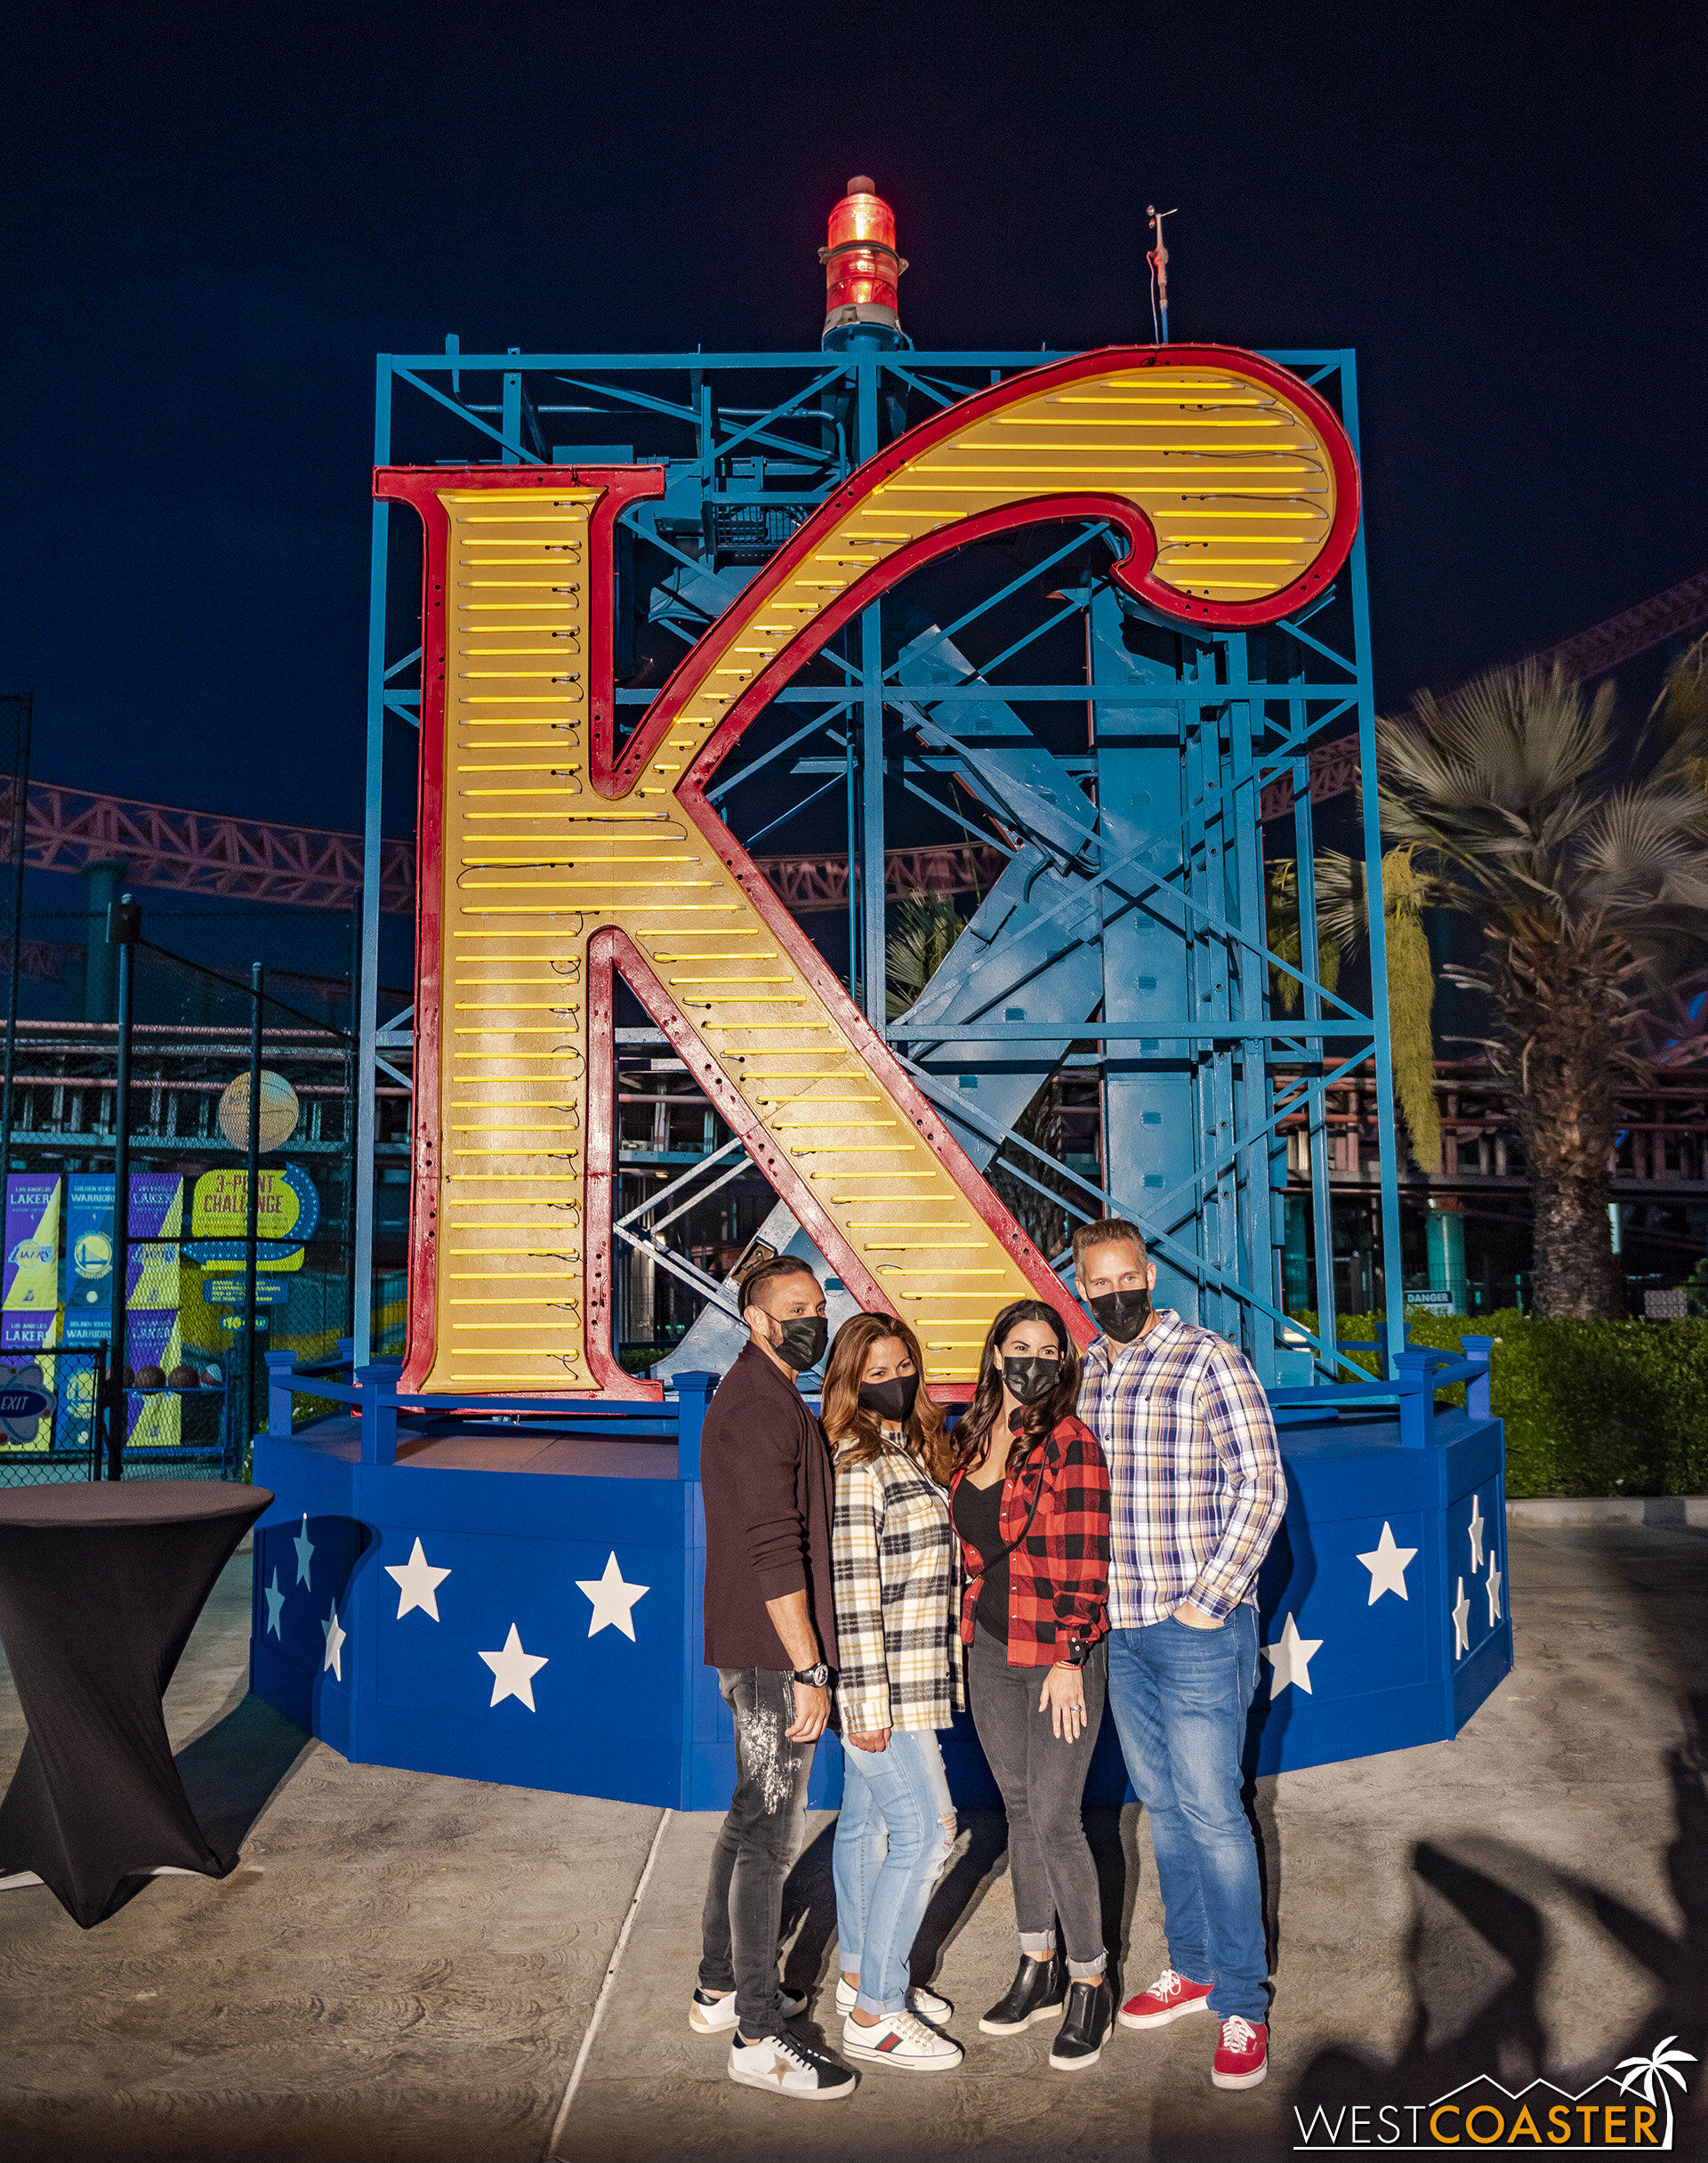  And this might be the actual classic ‘K’ sign that used to grace the top of the Sky Cabin.  Pretty awesome authenticity if that’s the case! 